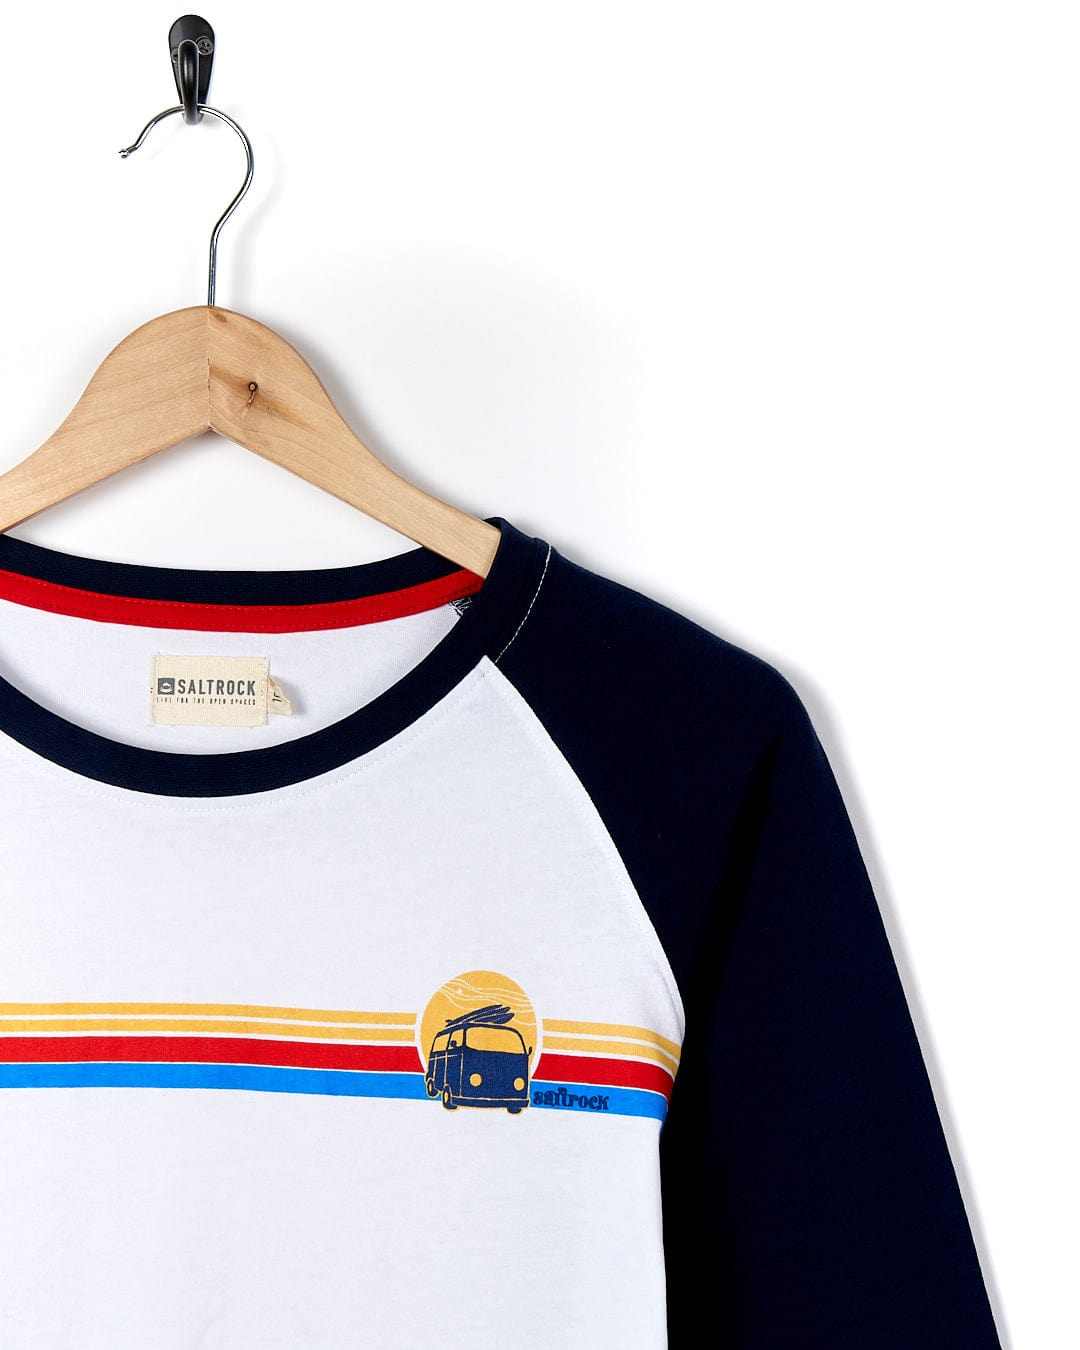 A Saltrock Celeste Stripe - Womens Long Sleeve Raglan T-Shirt - White/navy with a yellow, blue and red stripe.